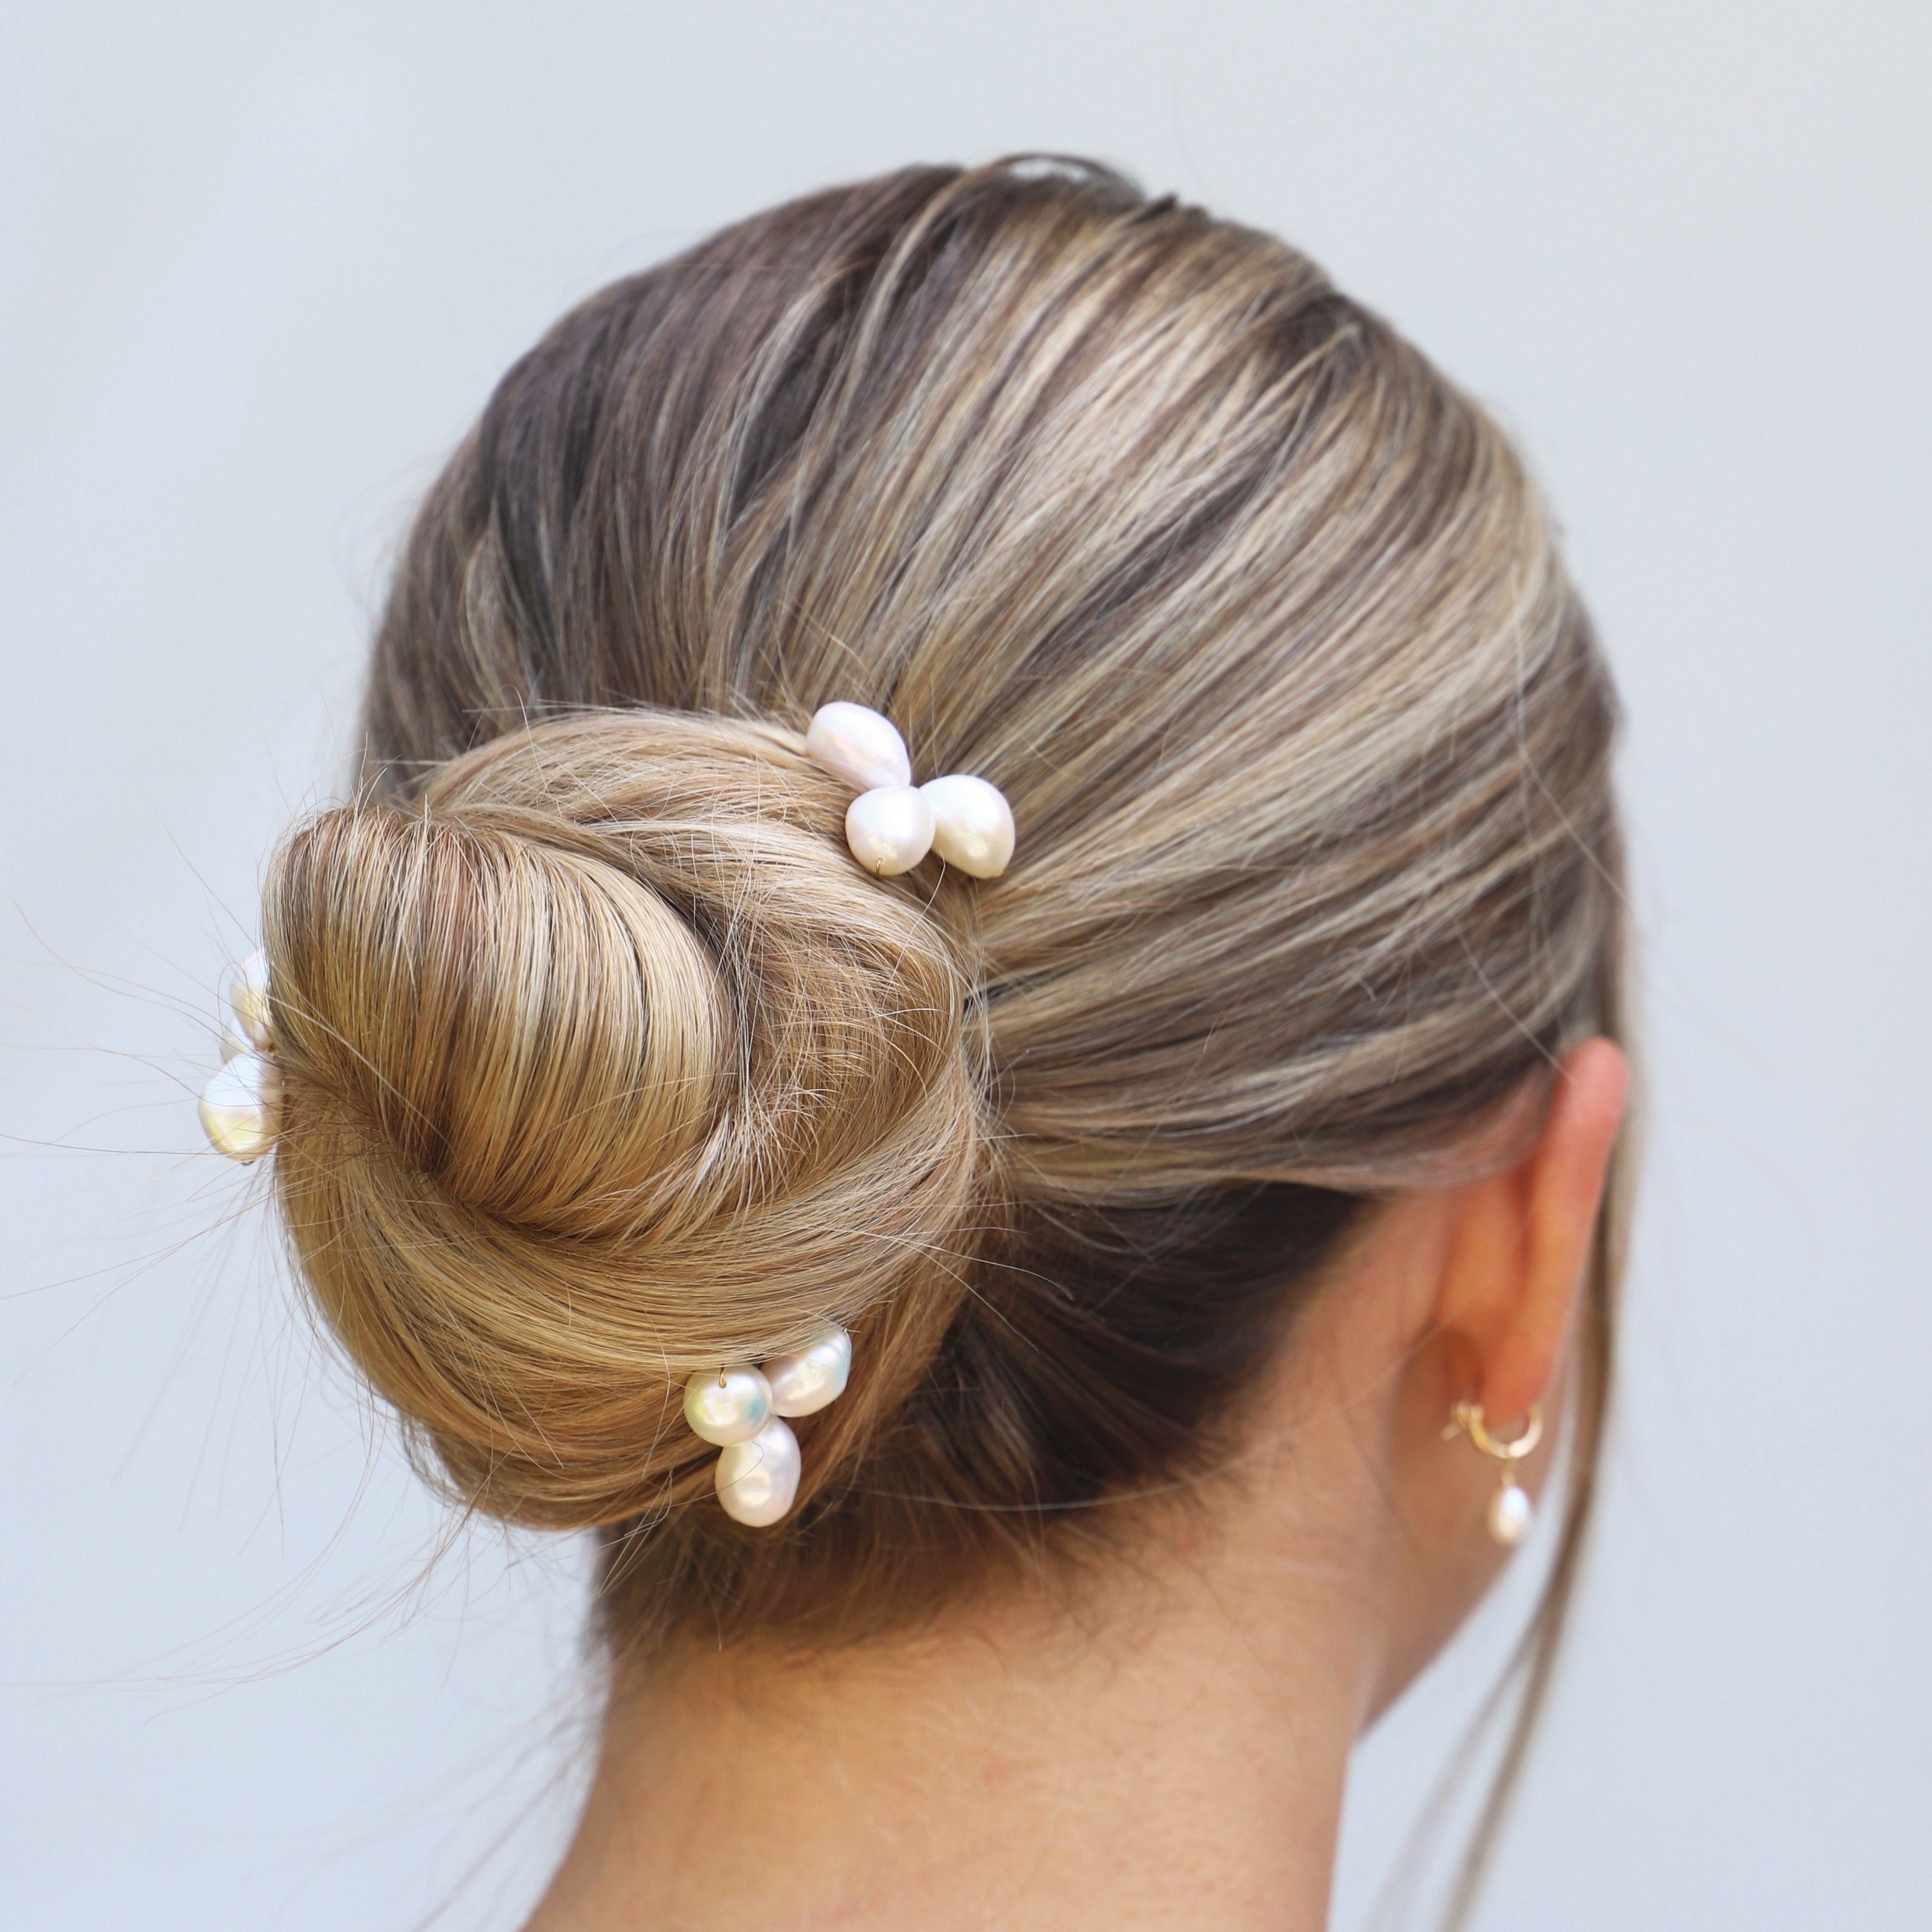 Hair Accessories for a Wedding